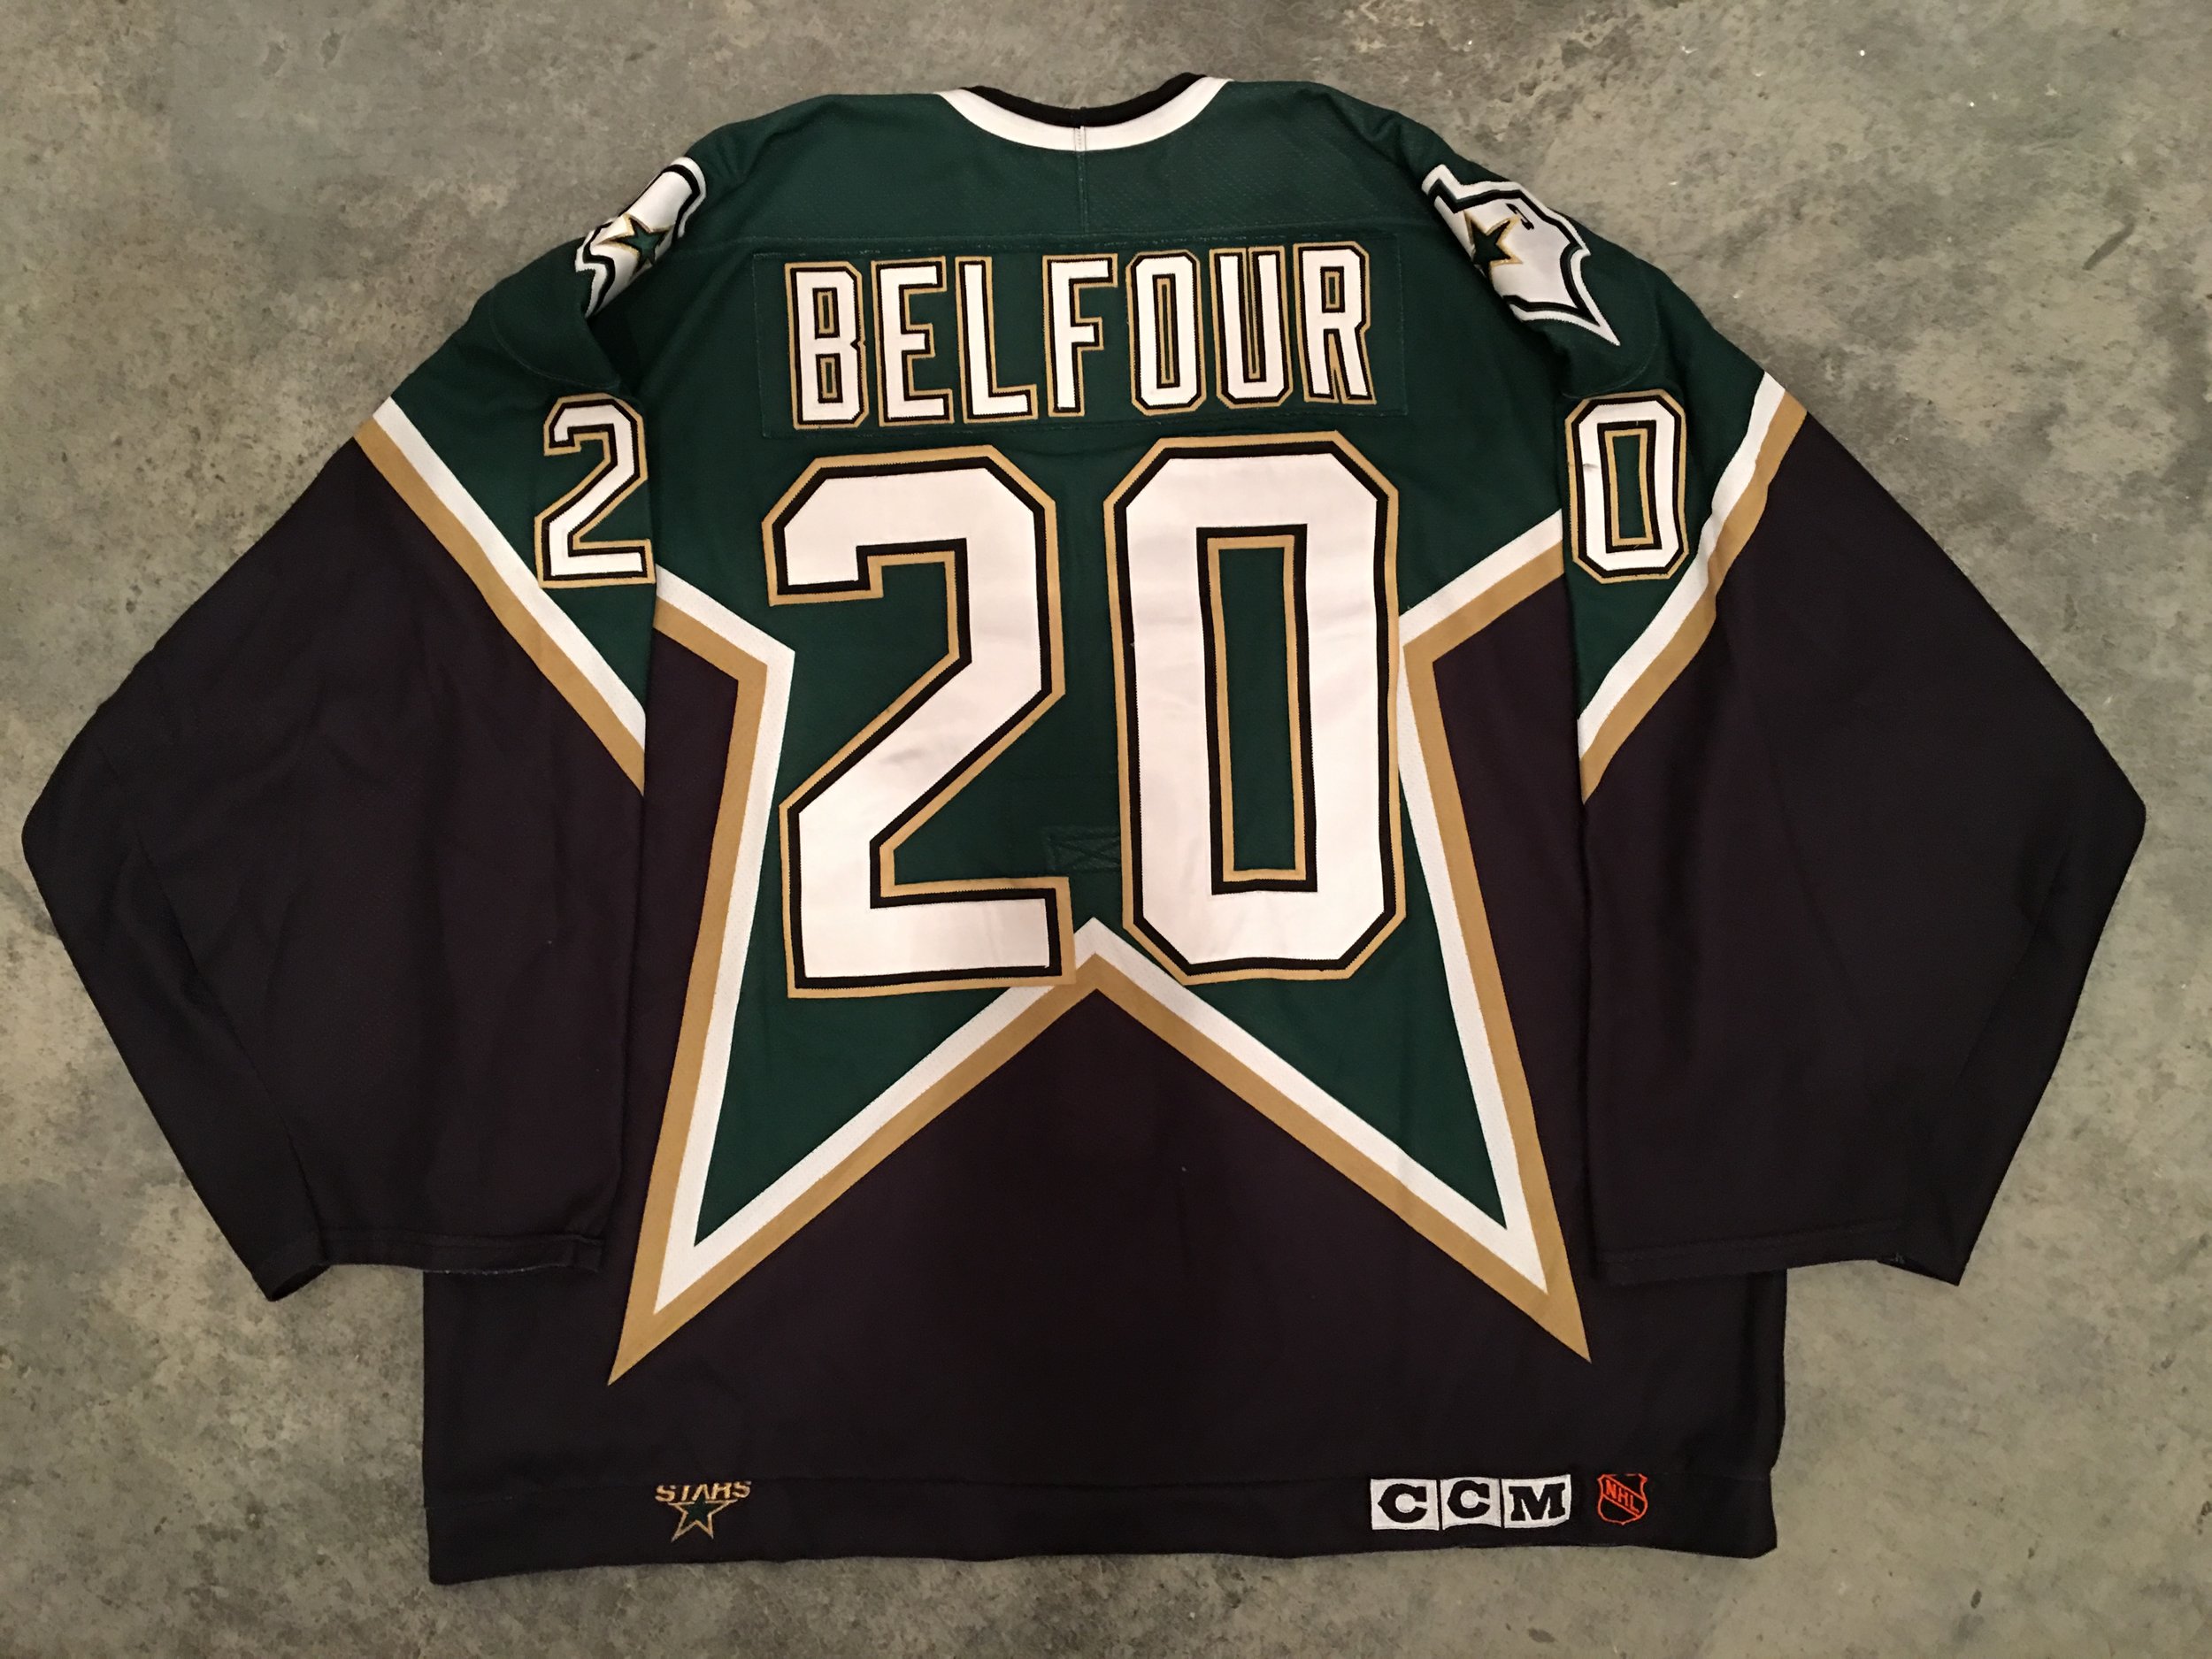 Ed Belfour  Game wear, Nhl all star game, Cup final